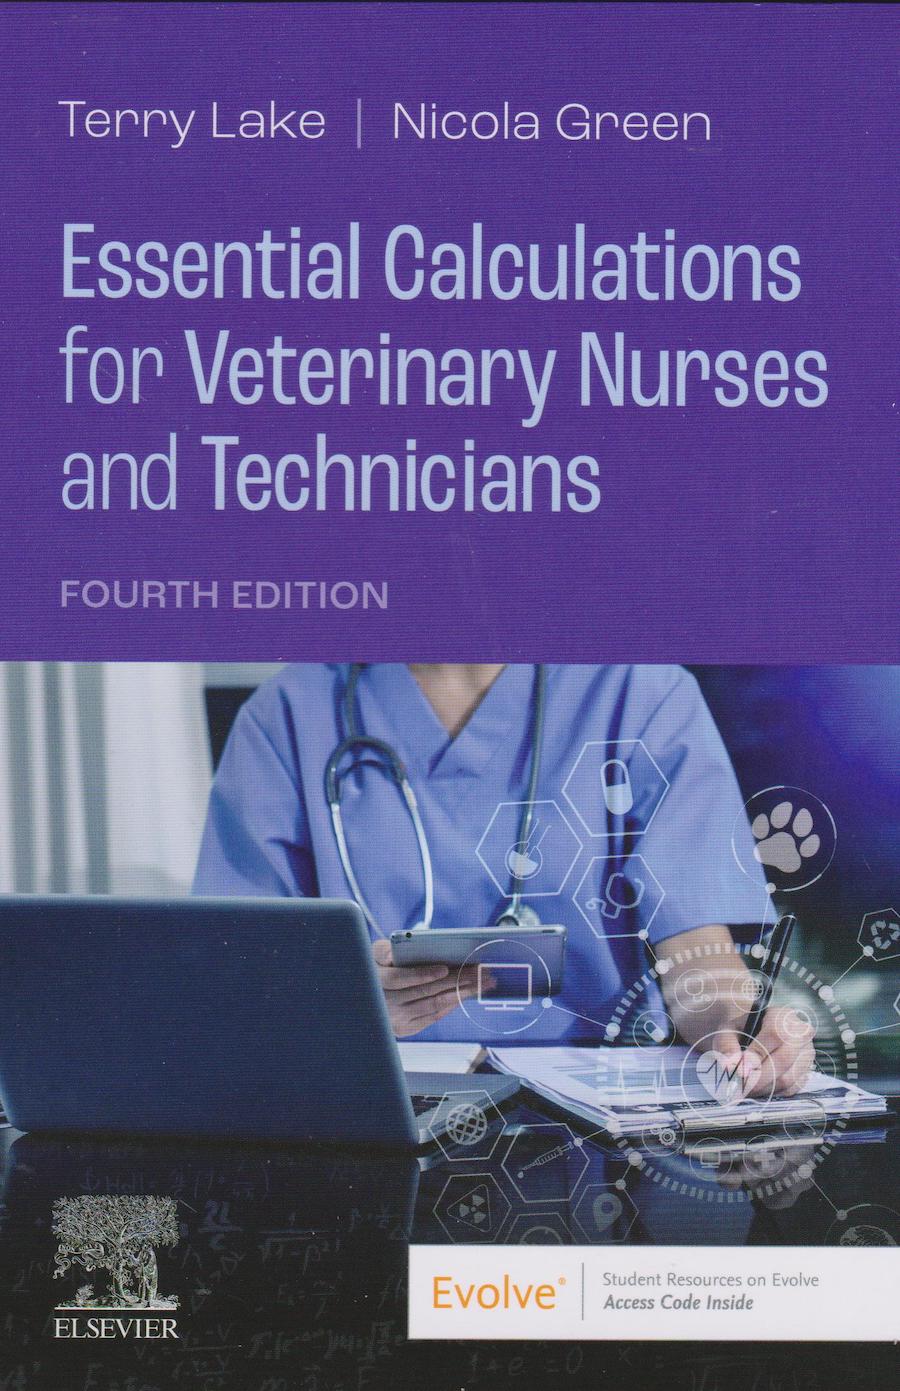 Essential calculations for veterinary nurses and technicians